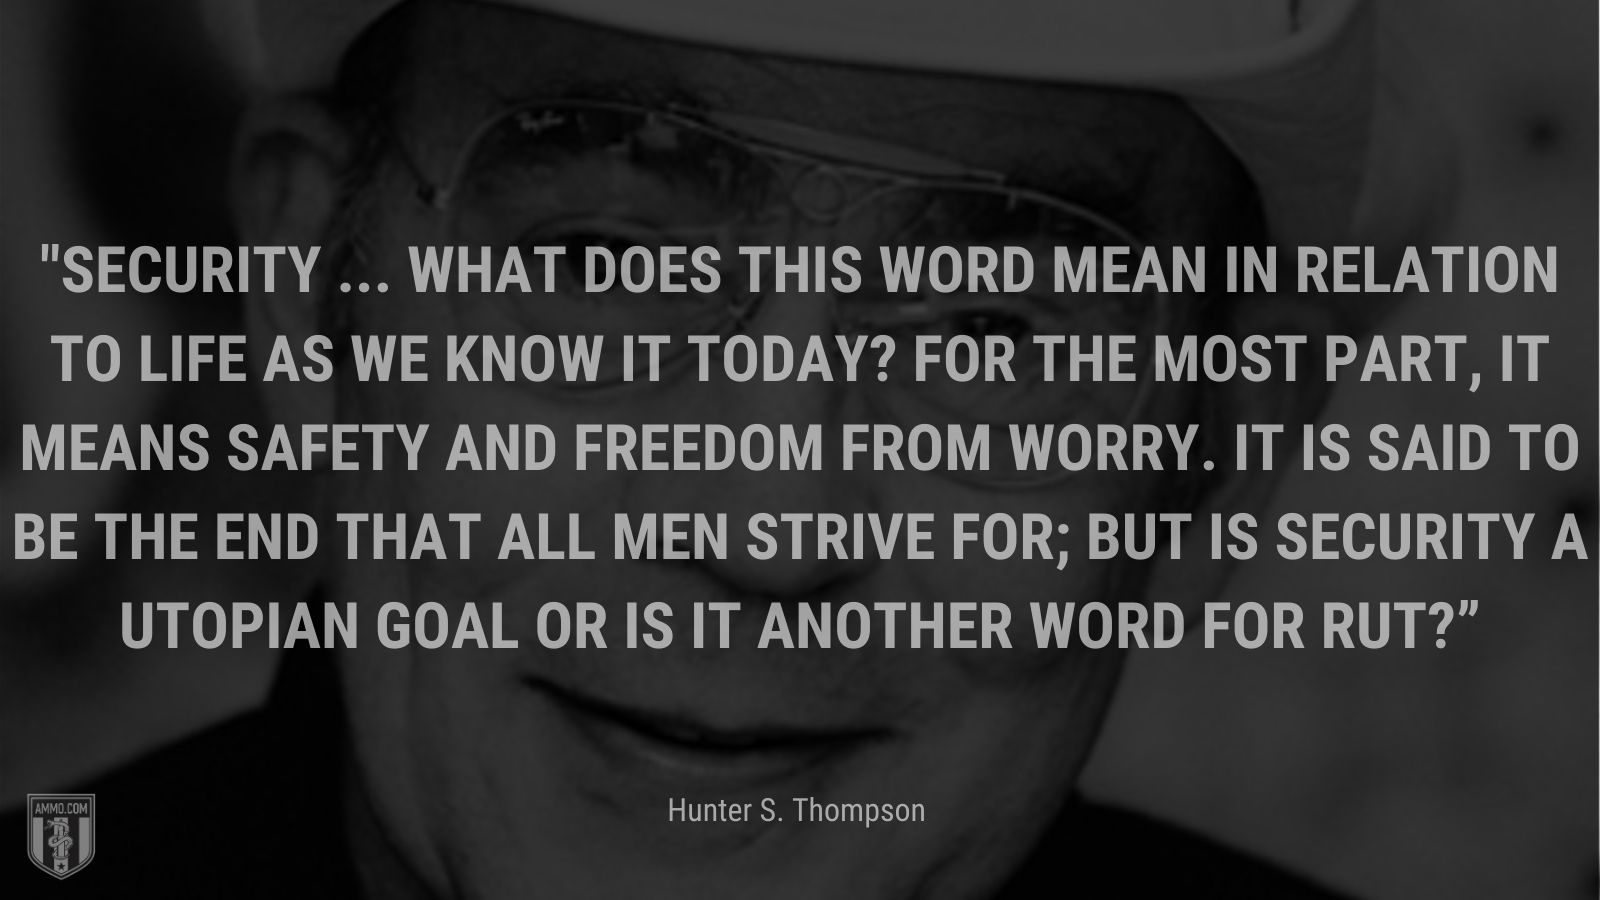 “Security ... what does this word mean in relation to life as we know it today? For the most part, it means safety and freedom from worry. It is said to be the end that all men strive for; but is security a utopian goal or is it another word for rut?” - Hunter S. Thompson